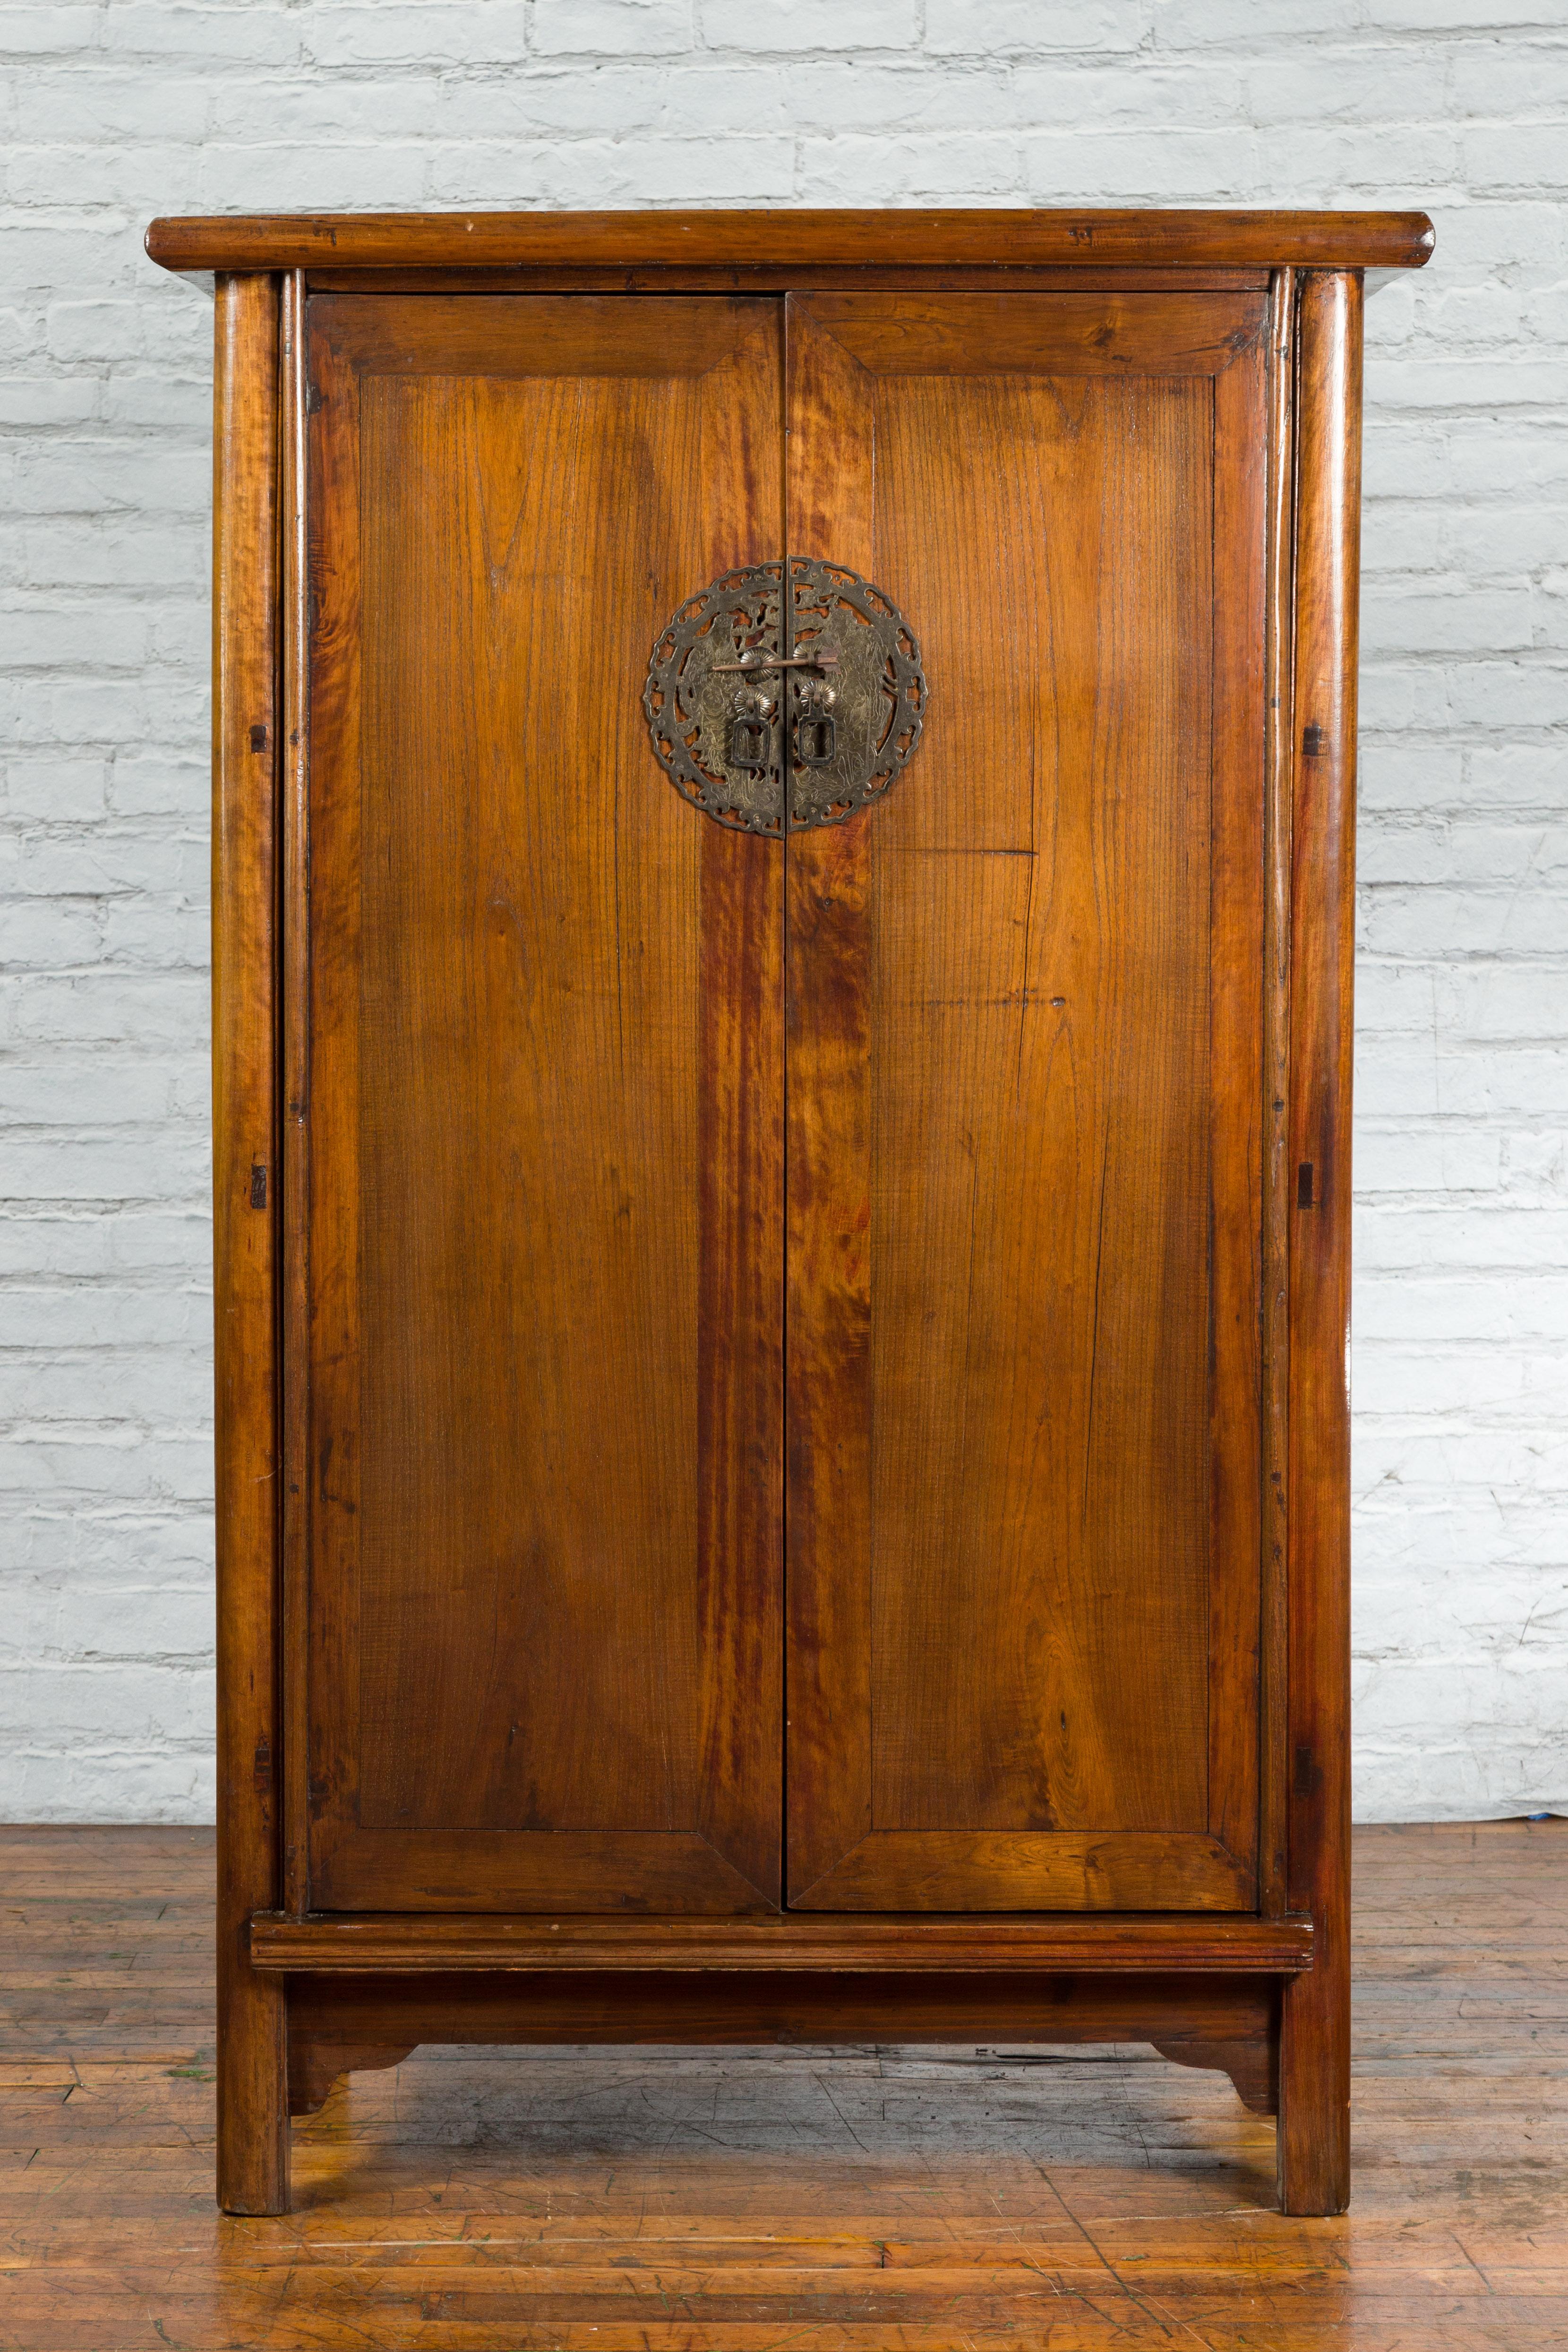 A Chinese Qing Dynasty period cabinet from the 19th century, with large bronze etched medallion. Created in China during the Qing Dynasty, this 19th century cabinet features a rectangular top overhanging two doors flanked with rounded side posts and